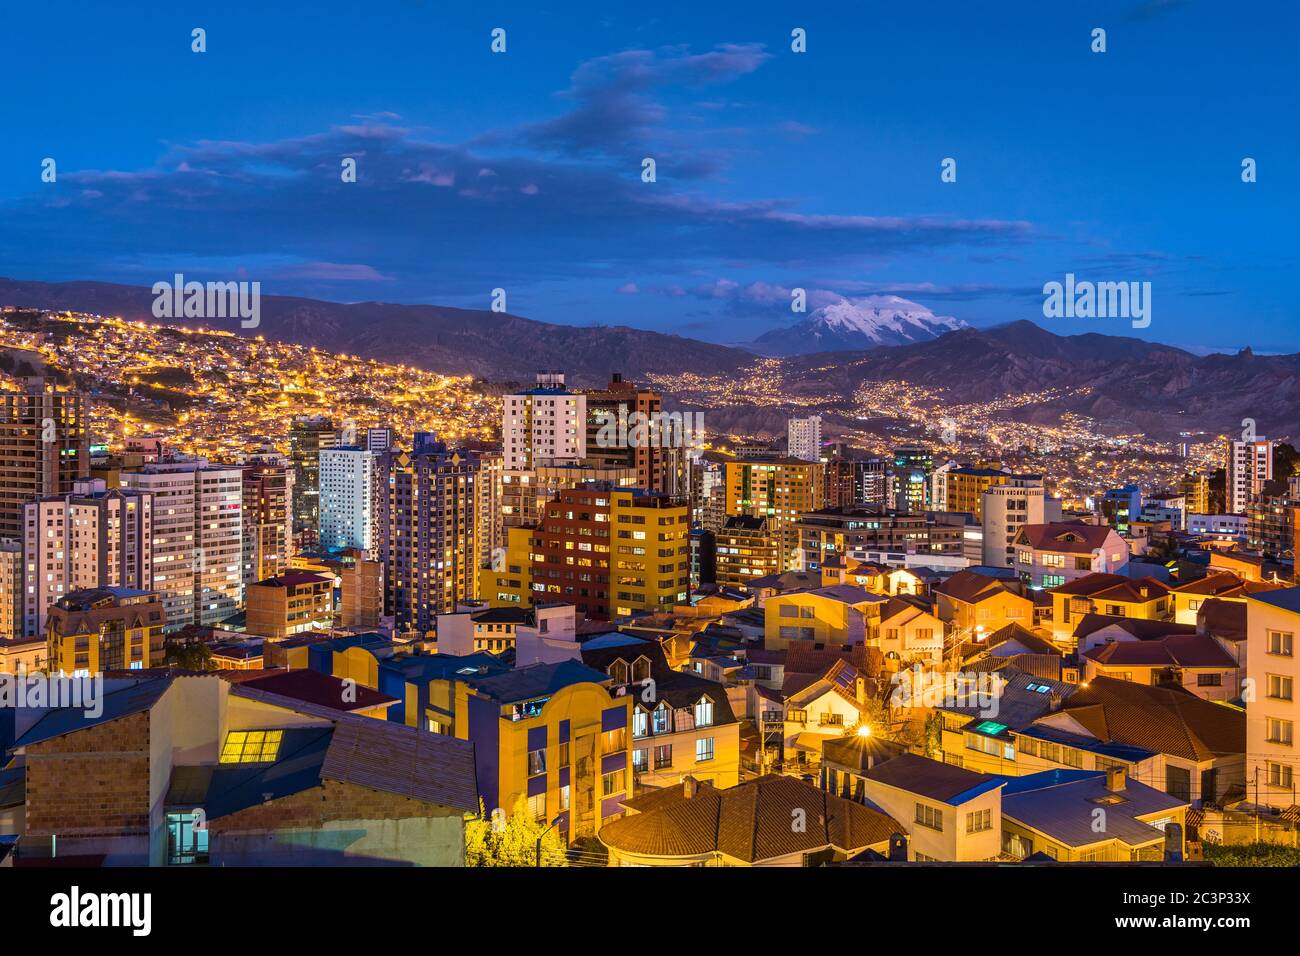 La Paz cityscape including Illimani mountain and residential buildings illuminated at night in Bolivia, South America. Stock Photo